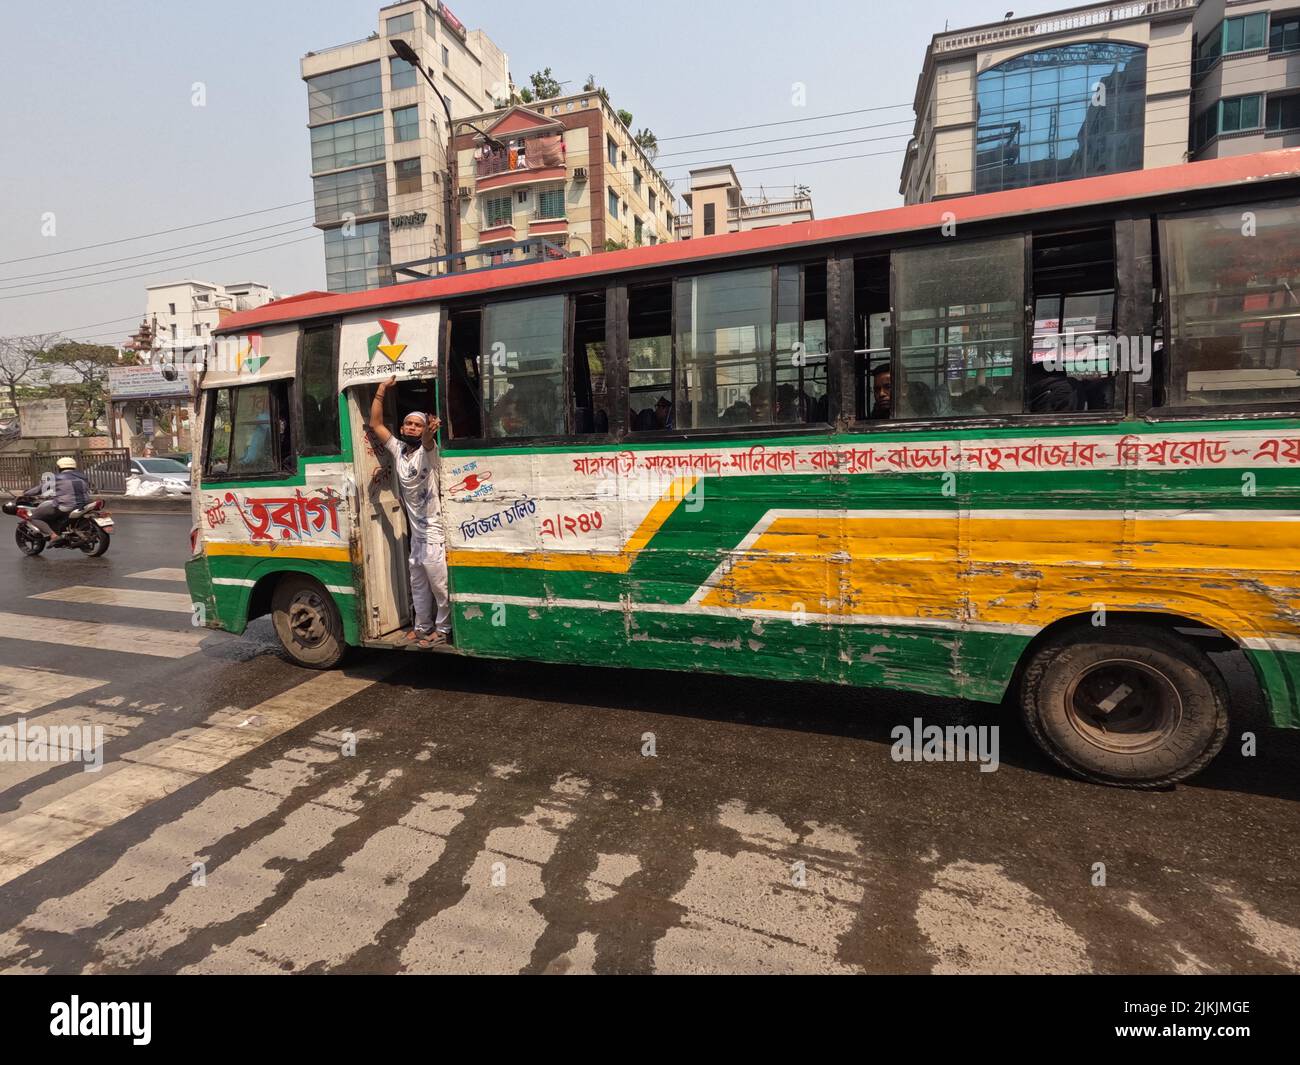 A beautiful shot of a big colorful old transport bus in the street in Dhaka, Bangladesh Stock Photo